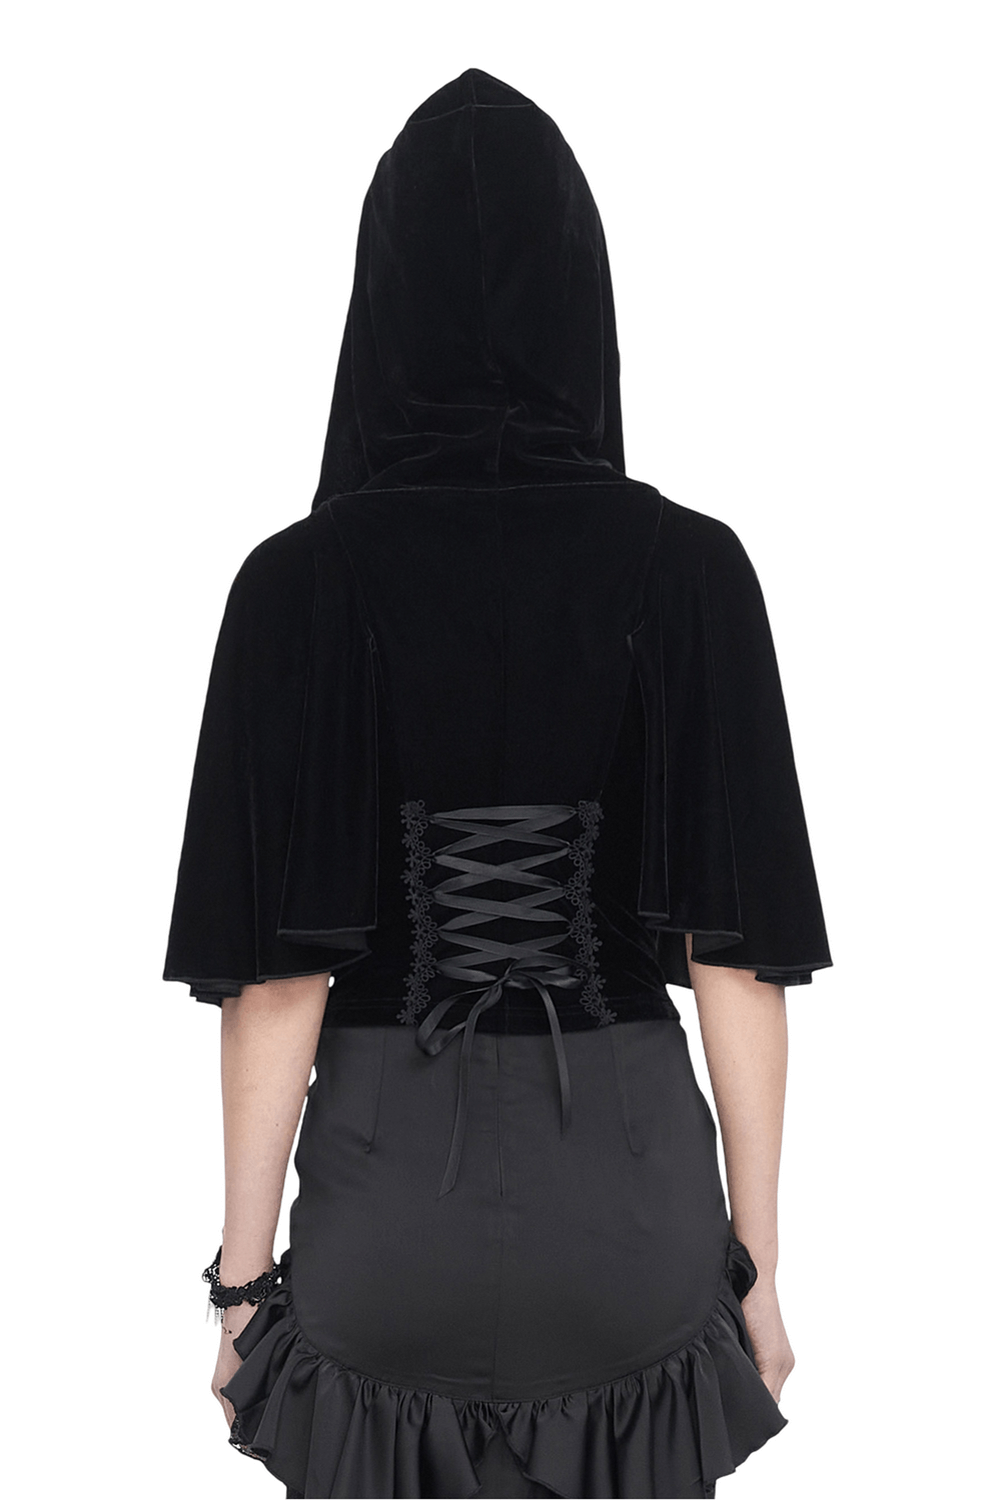 Gothic Hooded Top with Lace-Up Back and Lace Trim